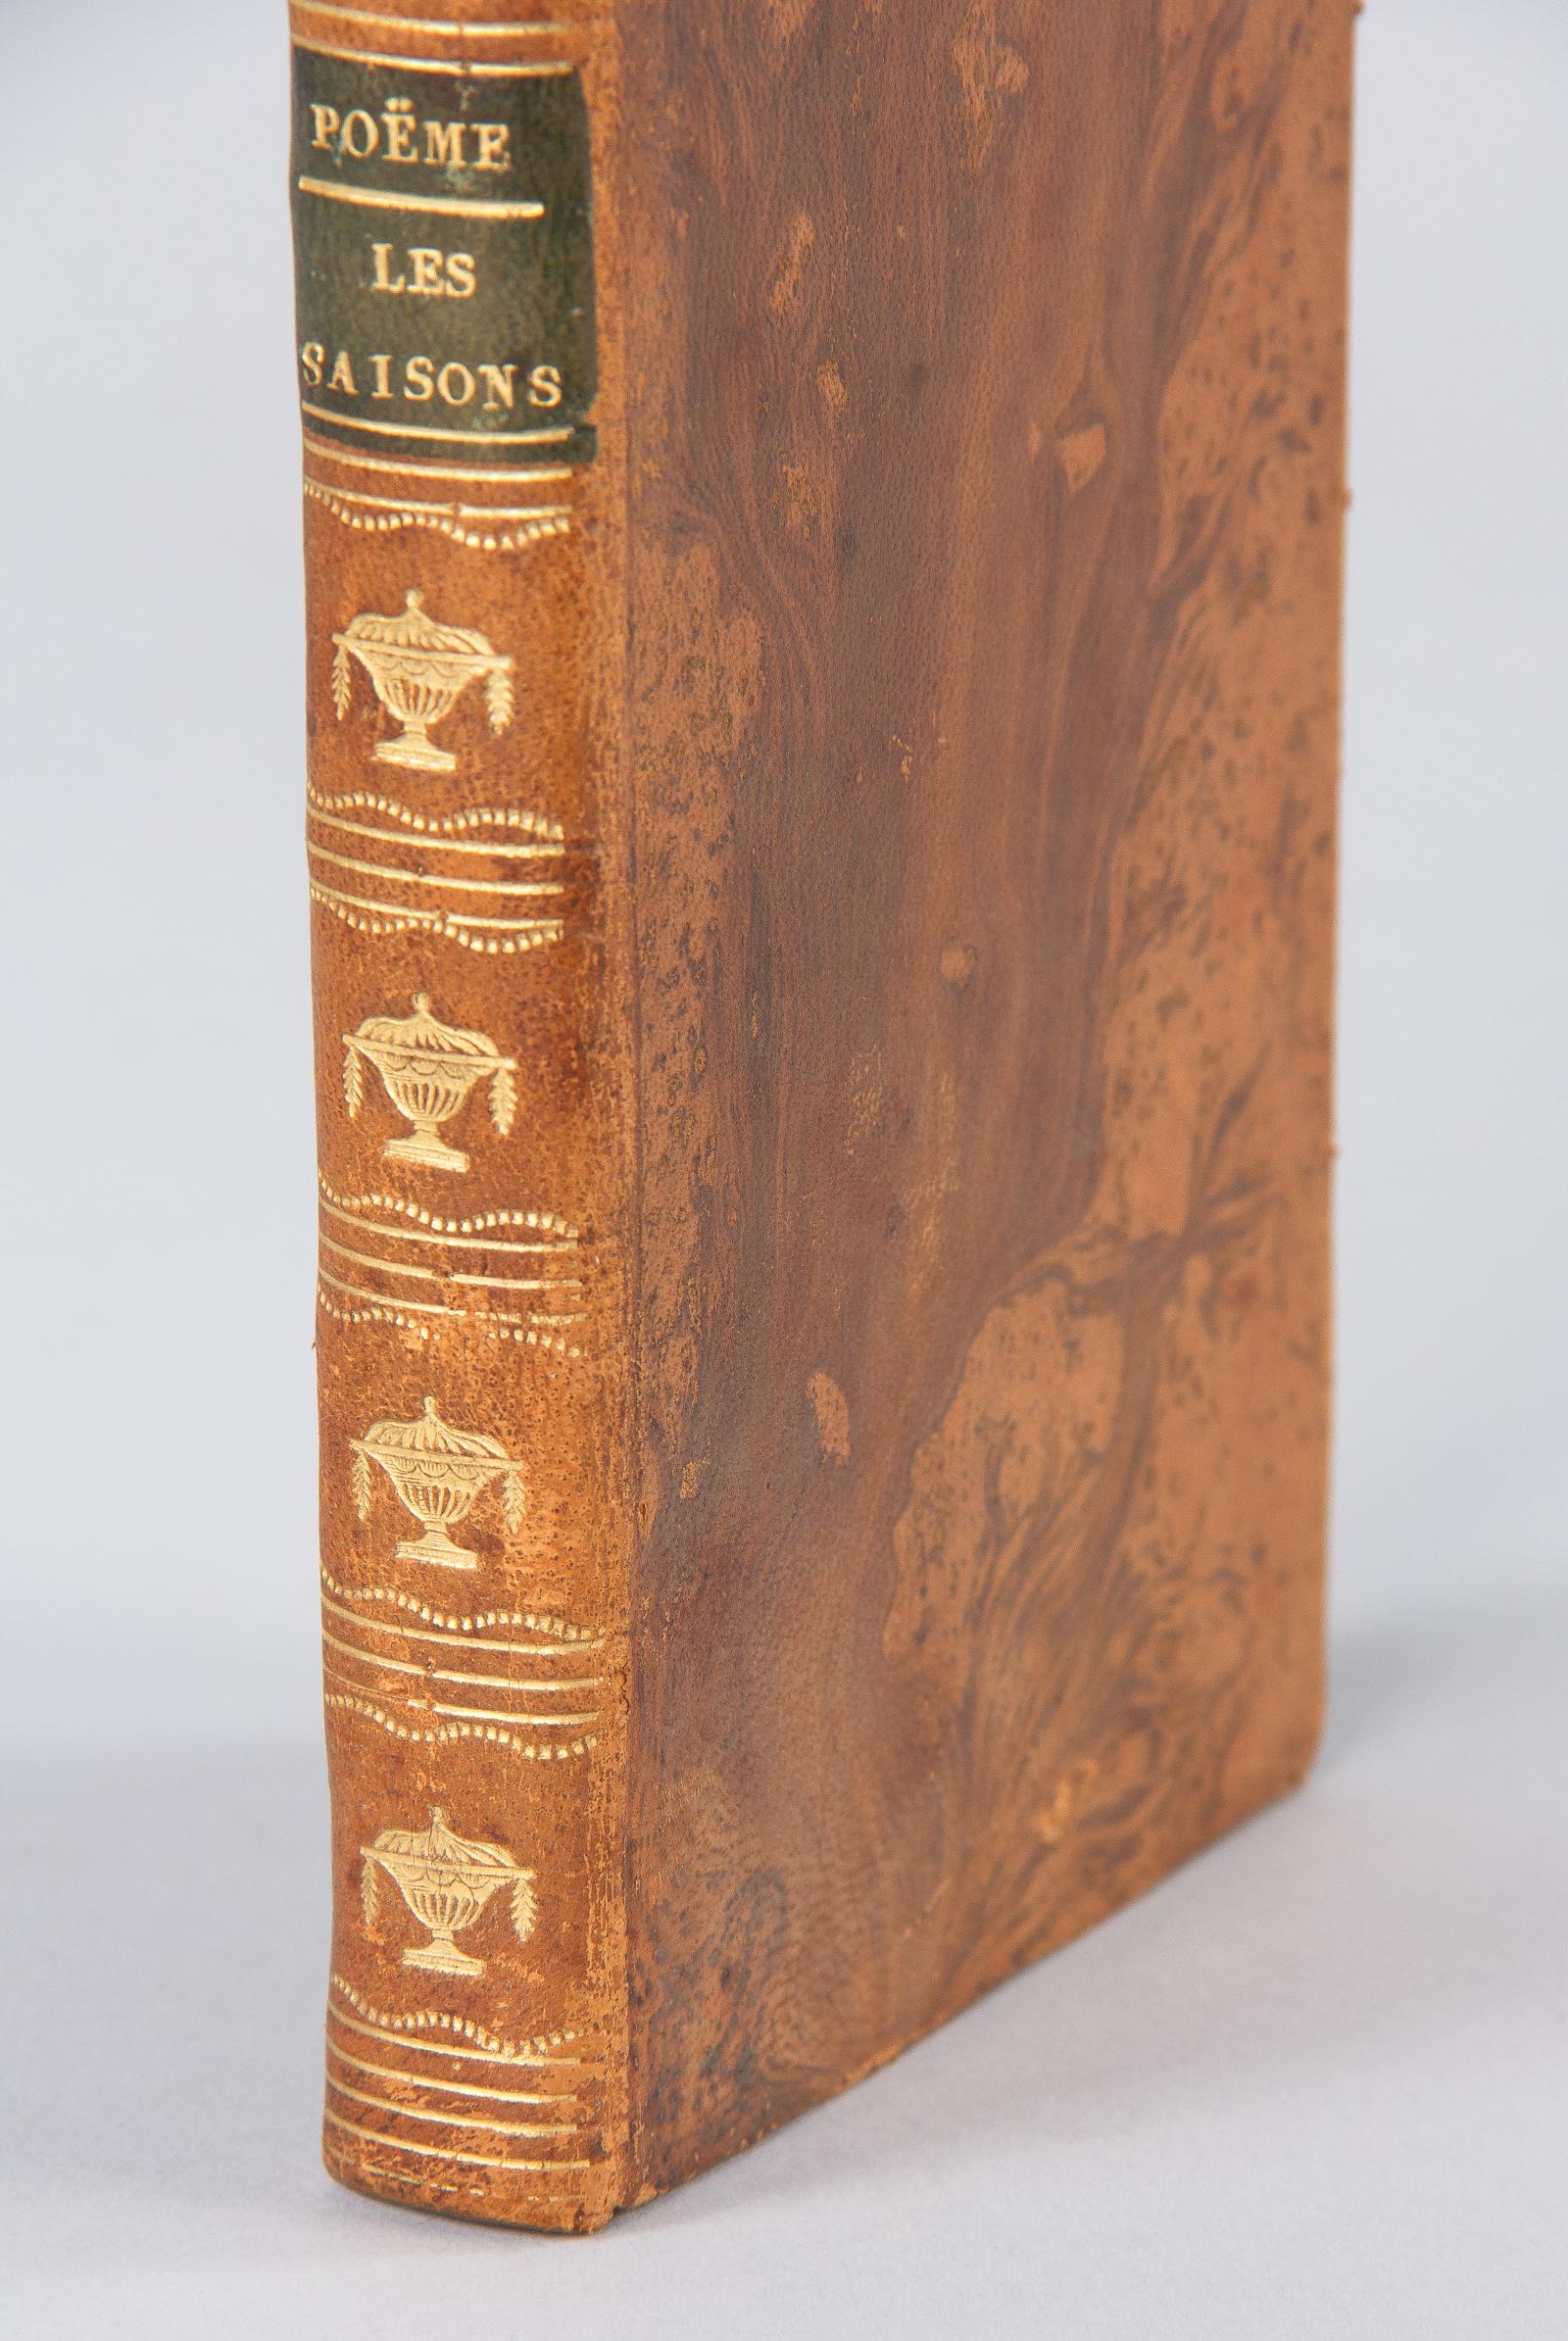 Leather French Poetry Book, Les Saisons by James Thomson, 1816